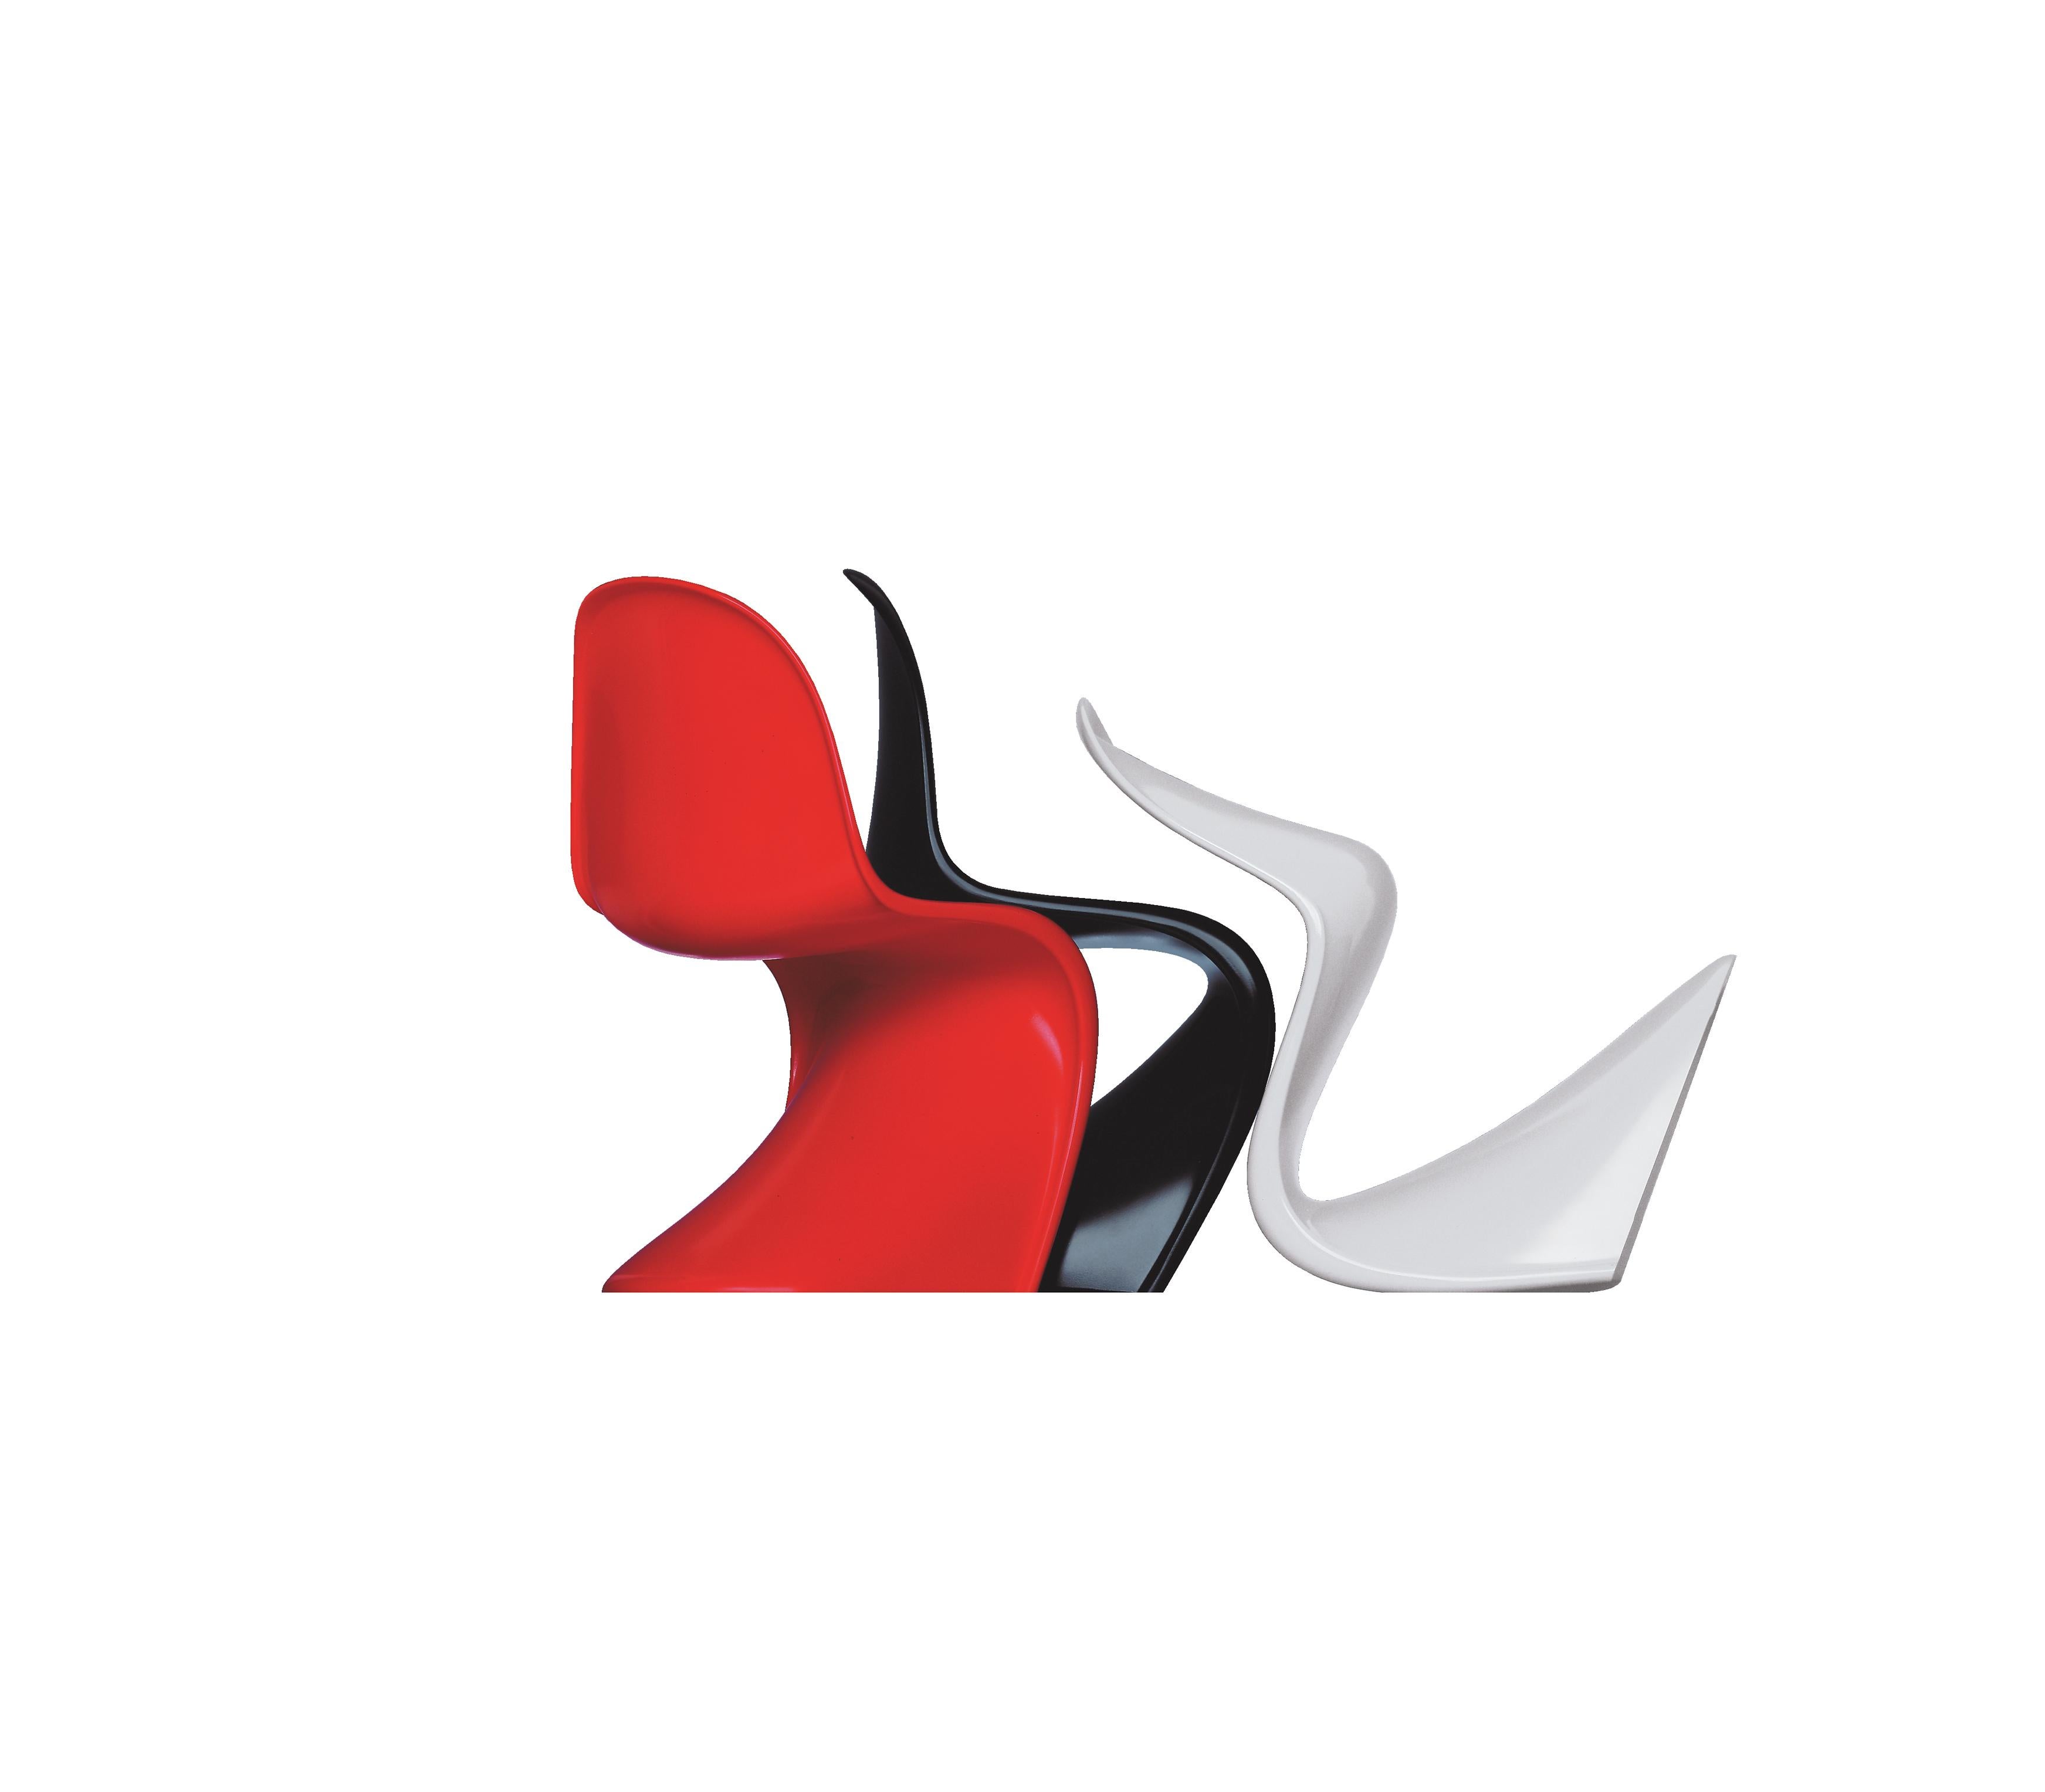 Swiss Vitra Classic Panton Chair in Lacquered Red by Verner Panton For Sale